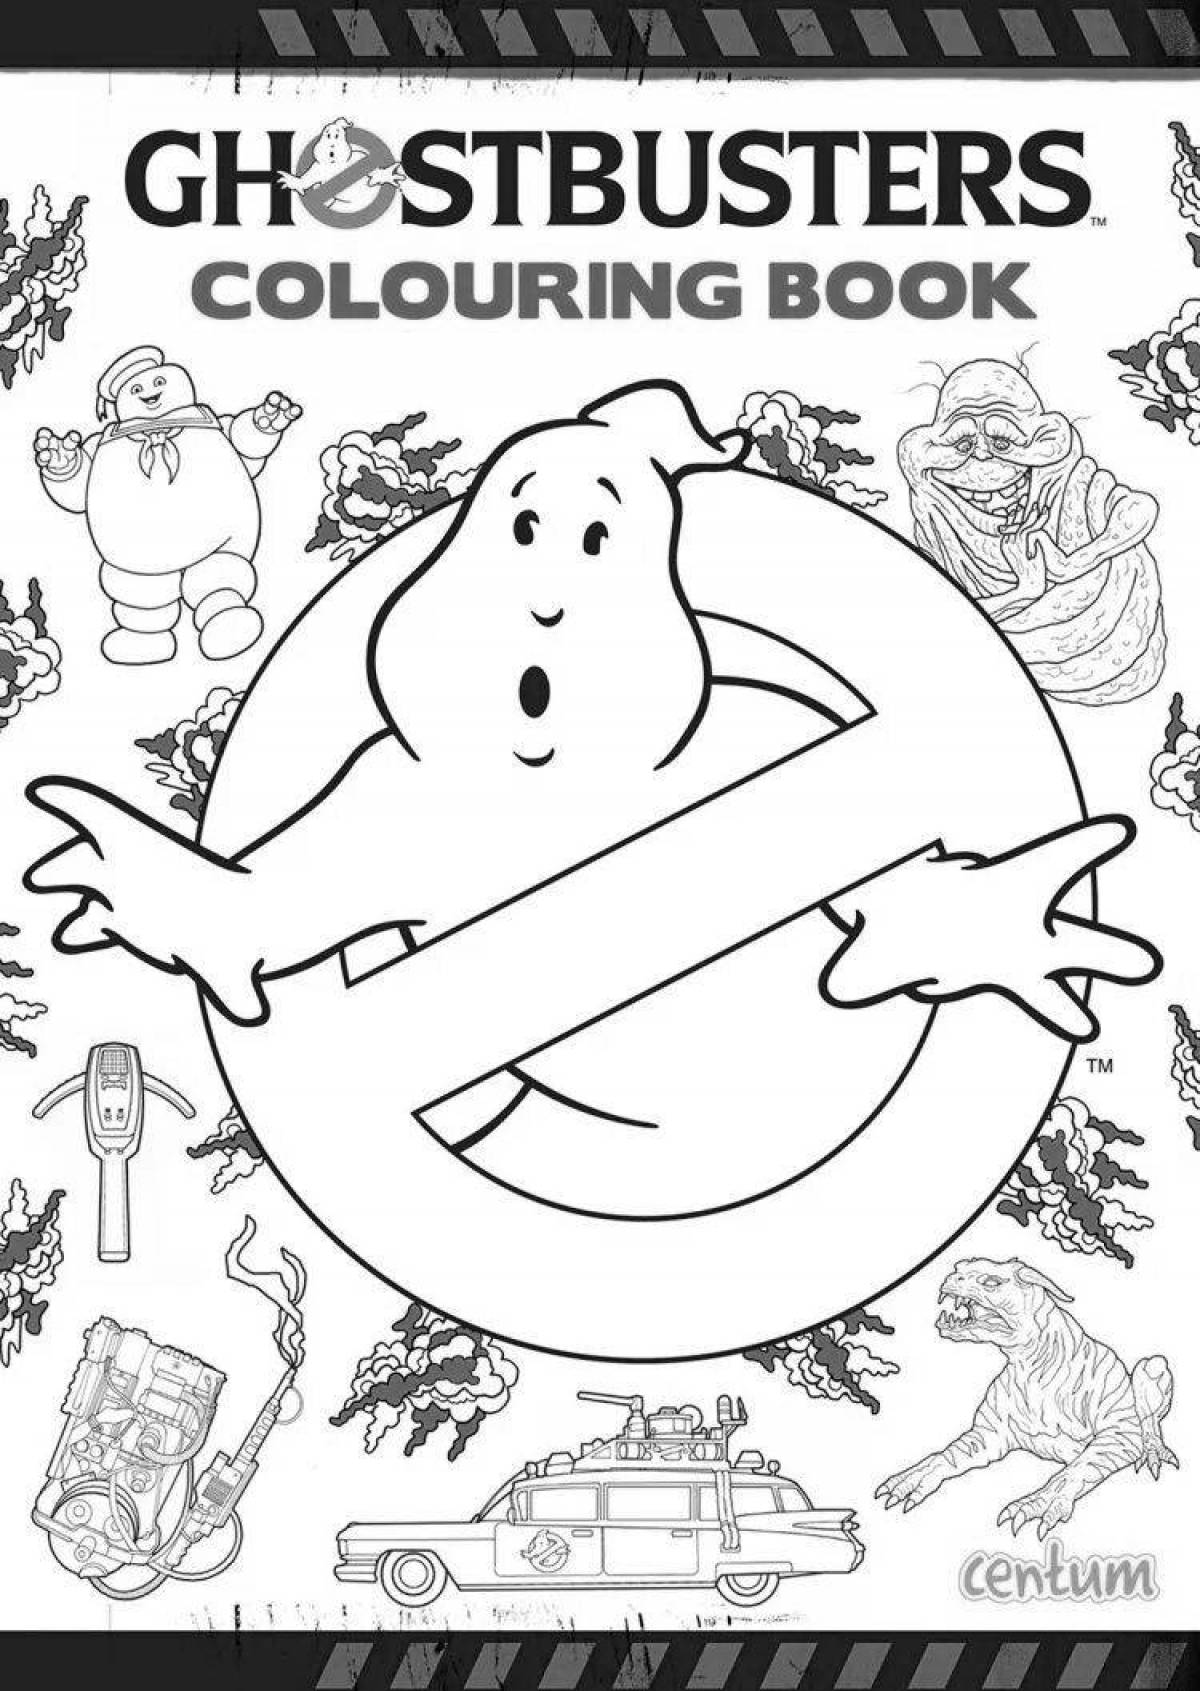 Ghostbuster magic car coloring page